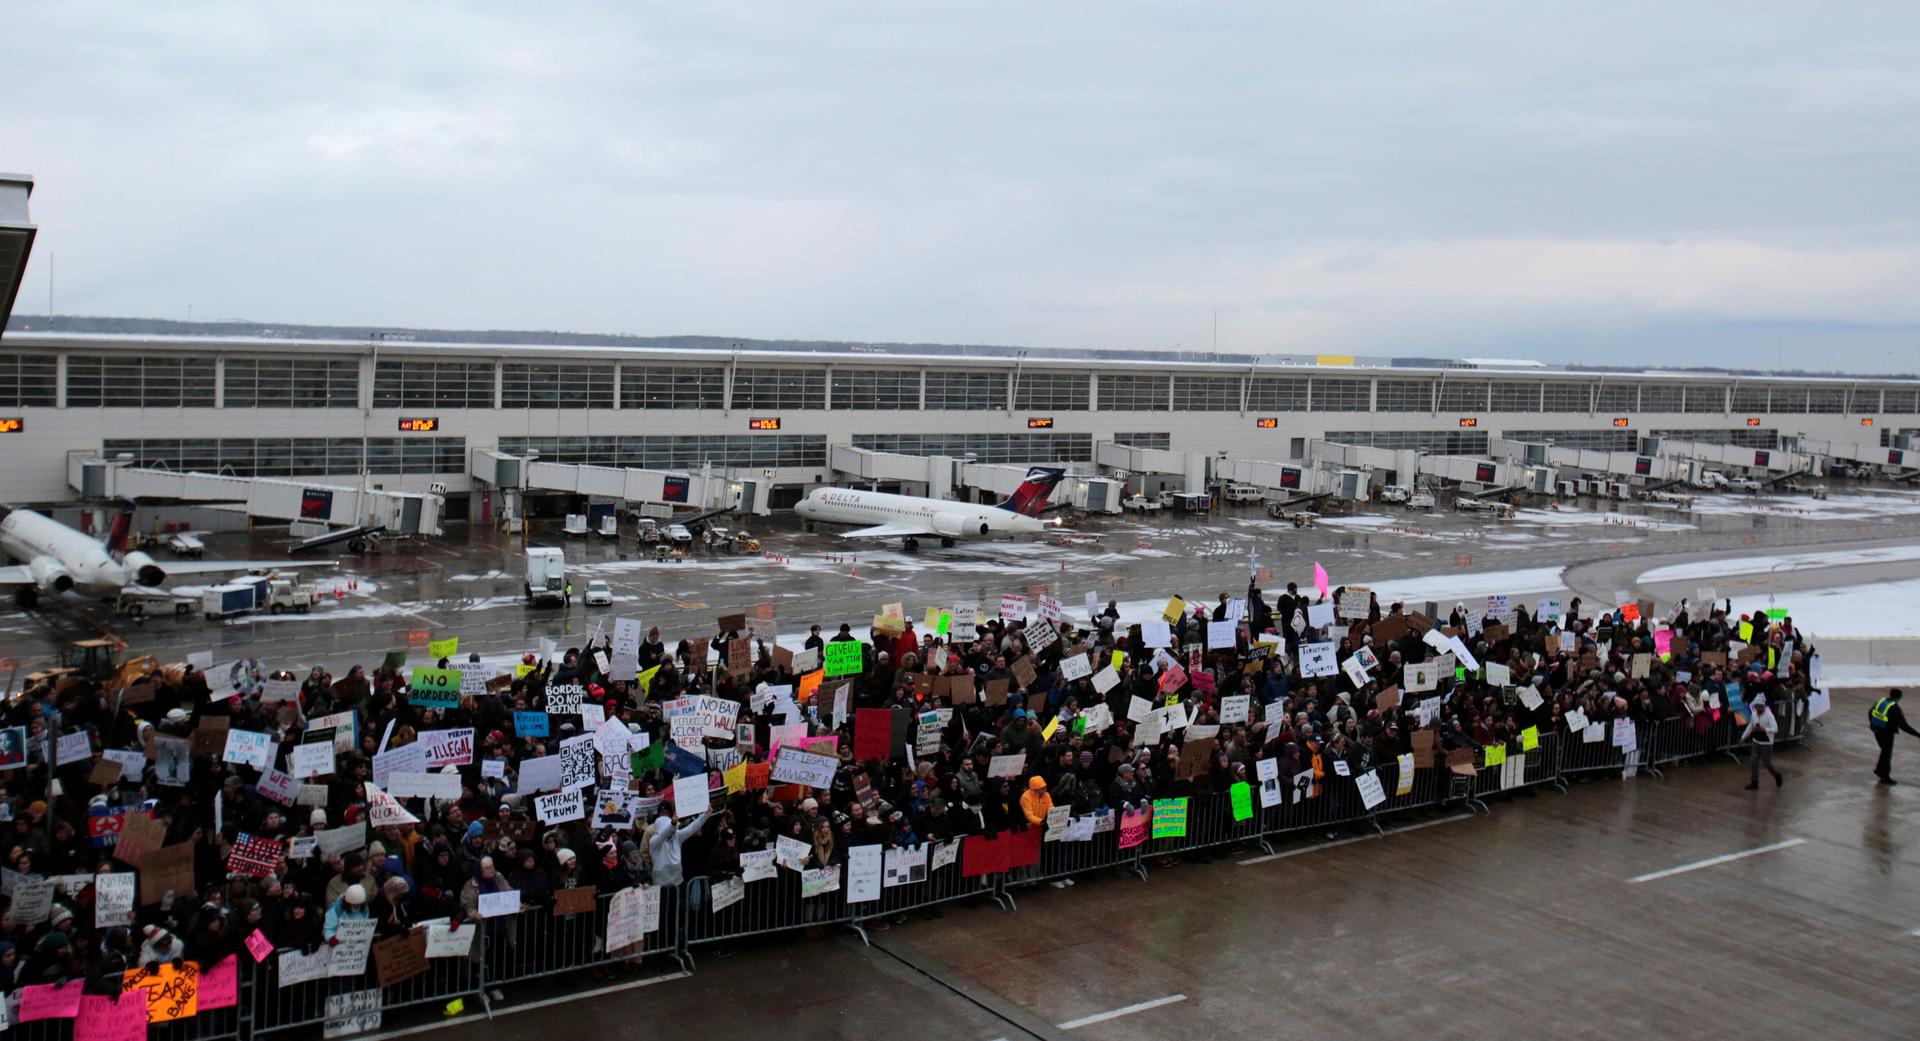 Protesters at airport, protesting outdoors in front of airplanes